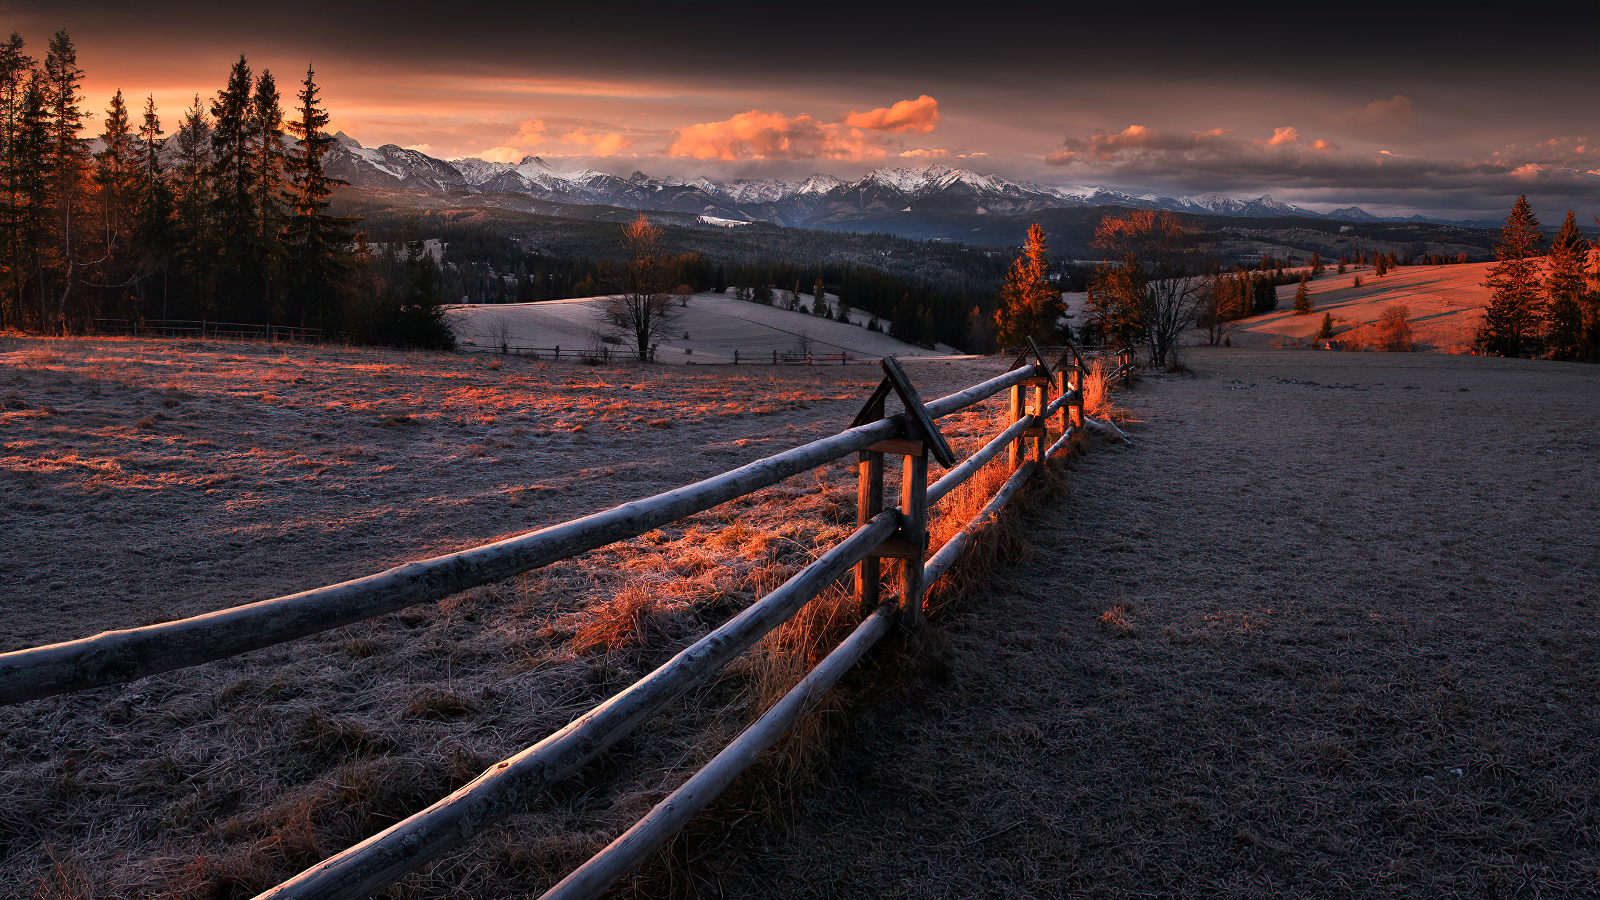 General 1600x900 fence farm winter trees landscape sunset mountains photography outdoors Tomasz Rojek frost